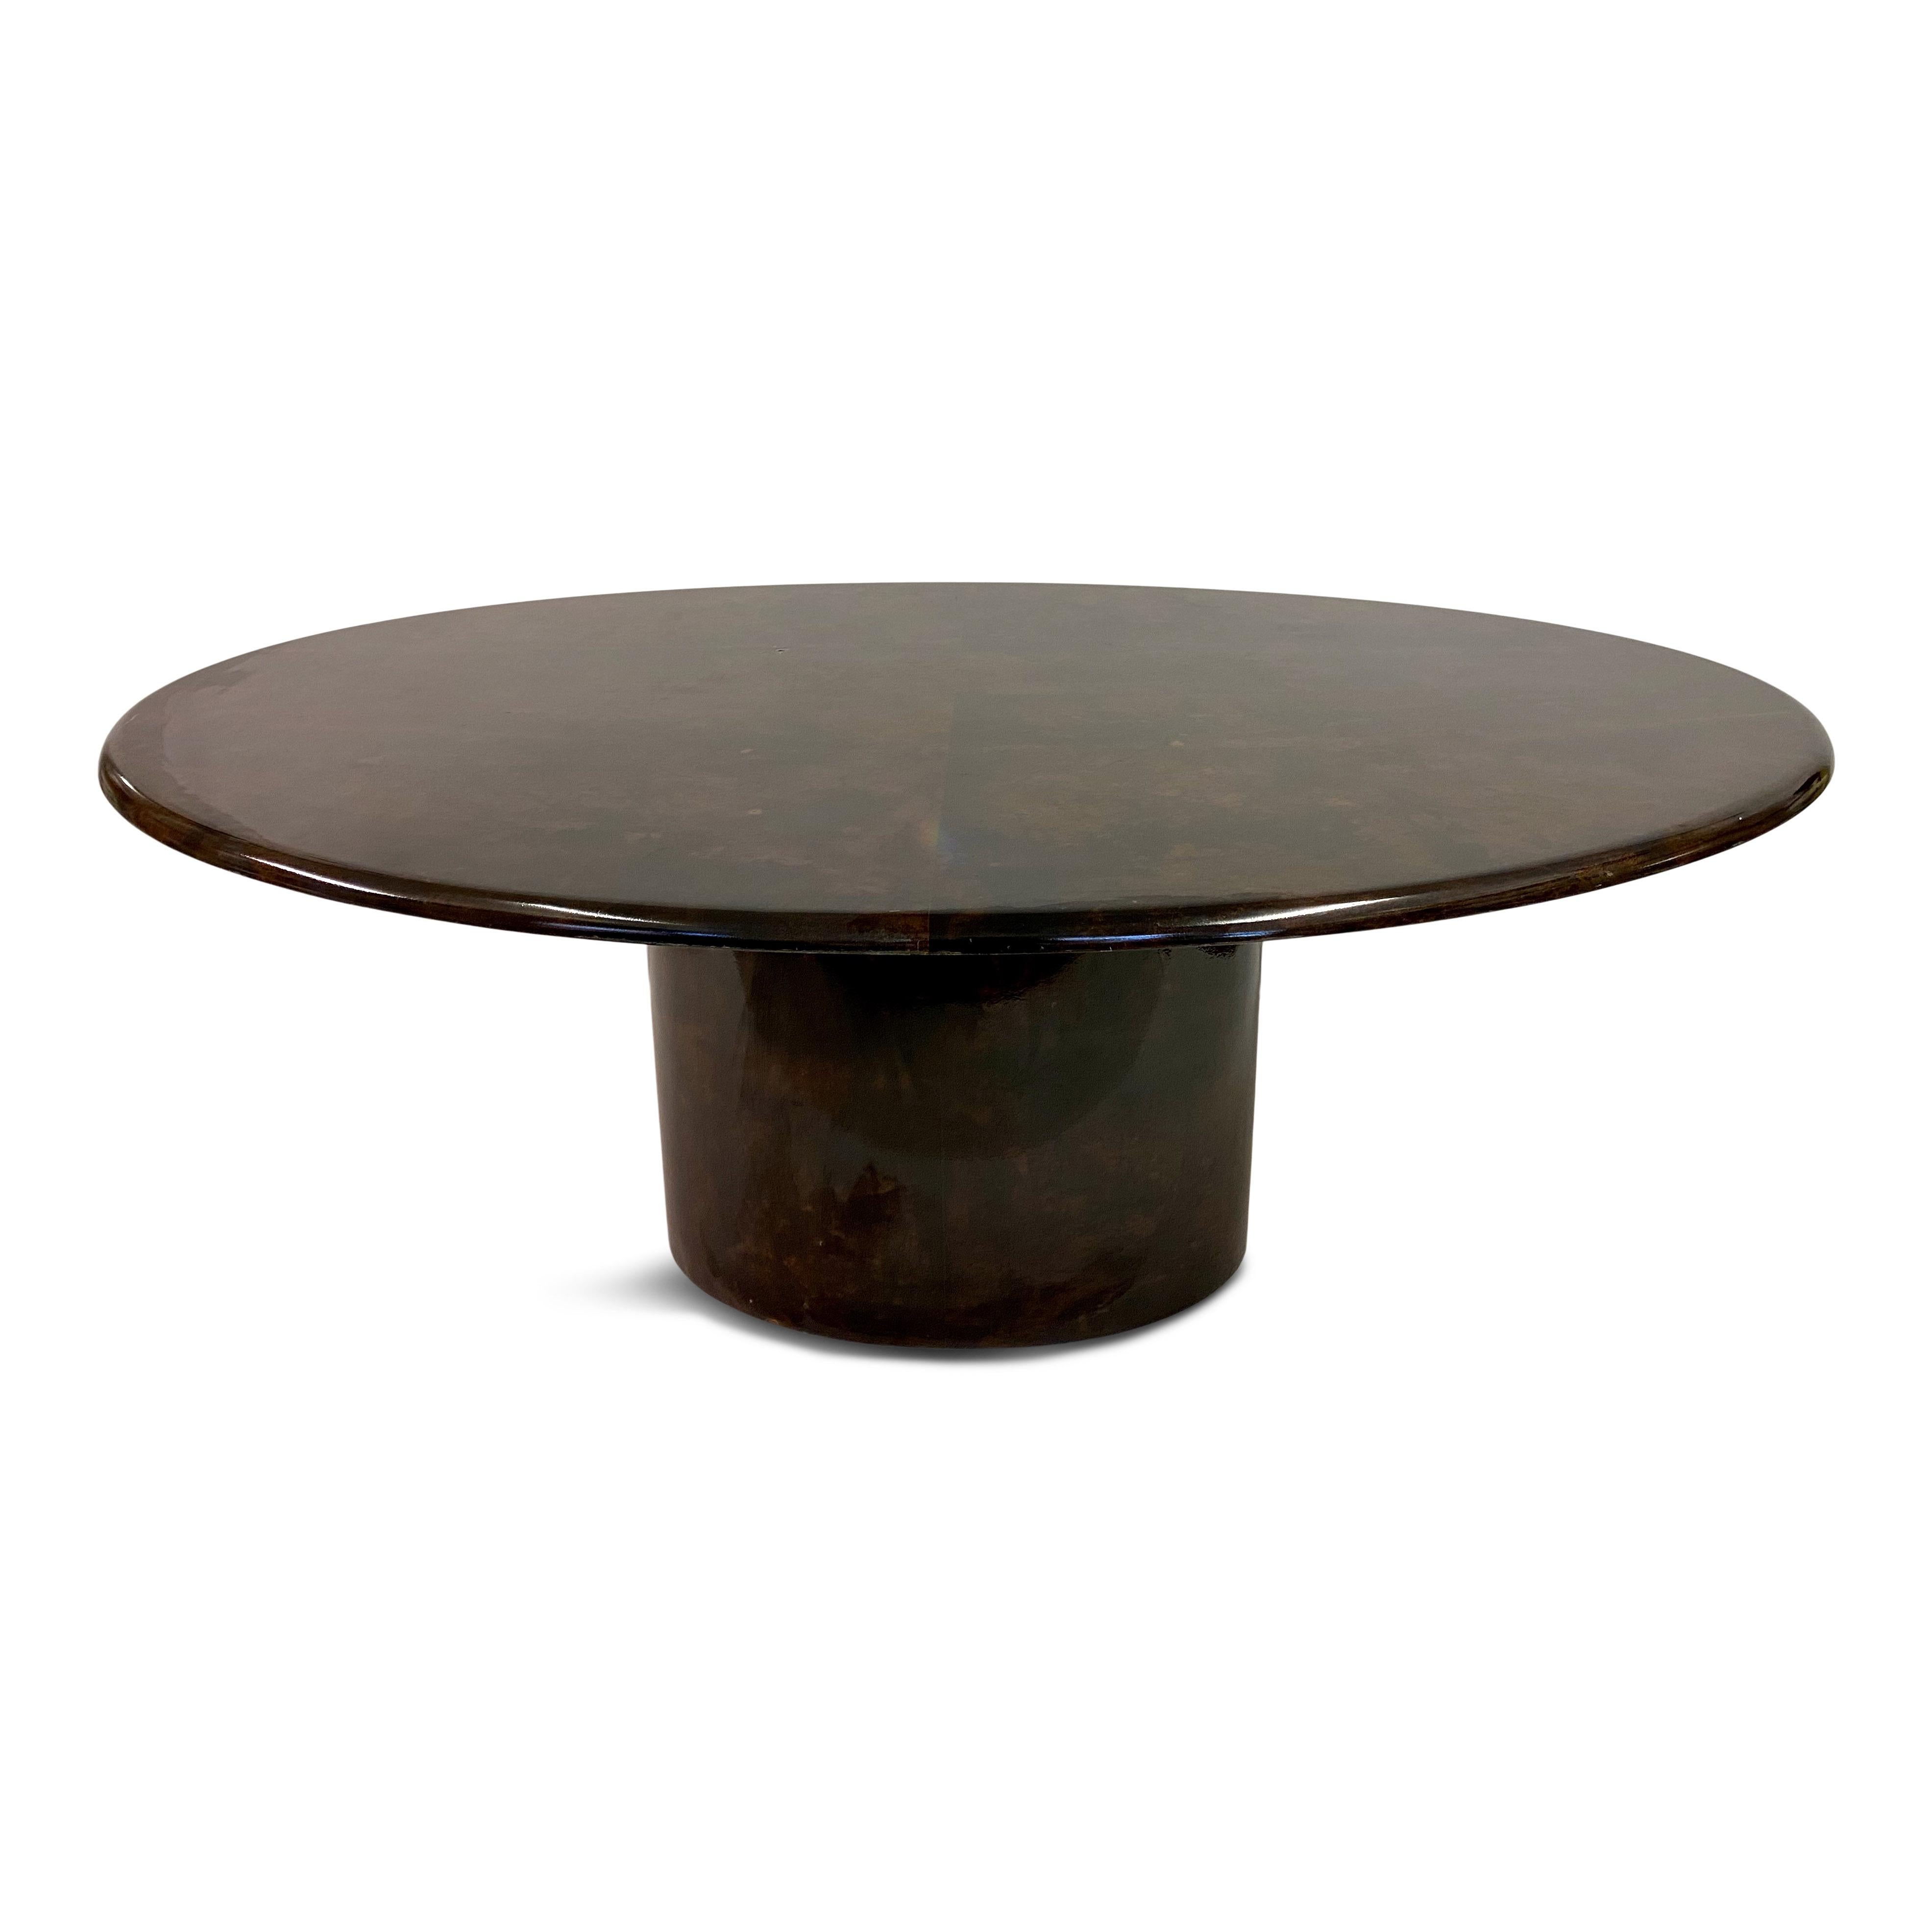 Dining table

Brown lacquered goatskin

By Aldo Tura

Oval shaped

Oval base

1960s-1970s Italy.